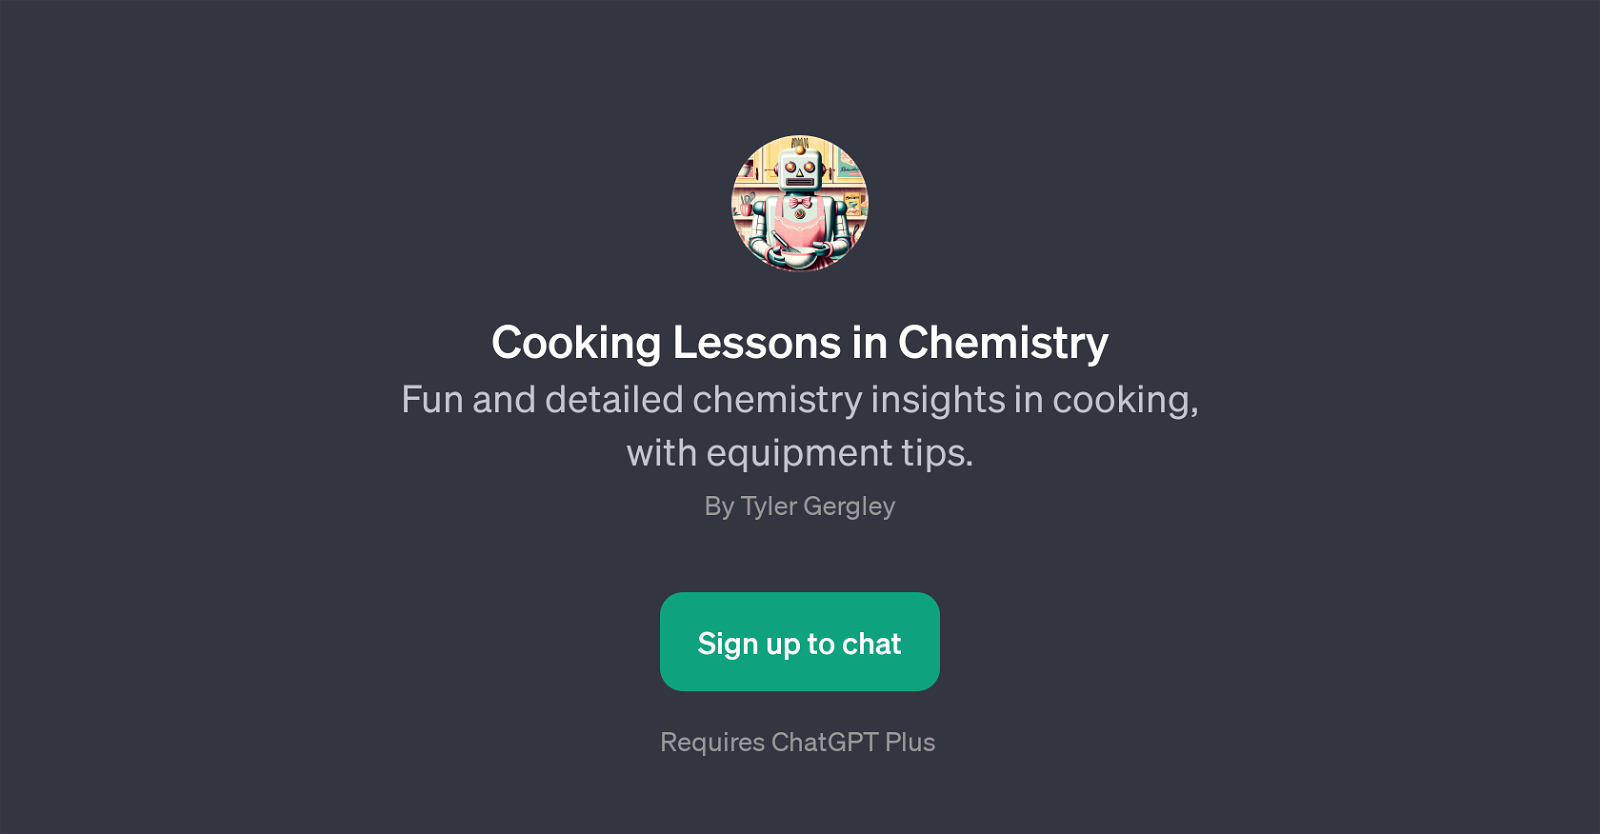 Cooking Lessons in Chemistry website